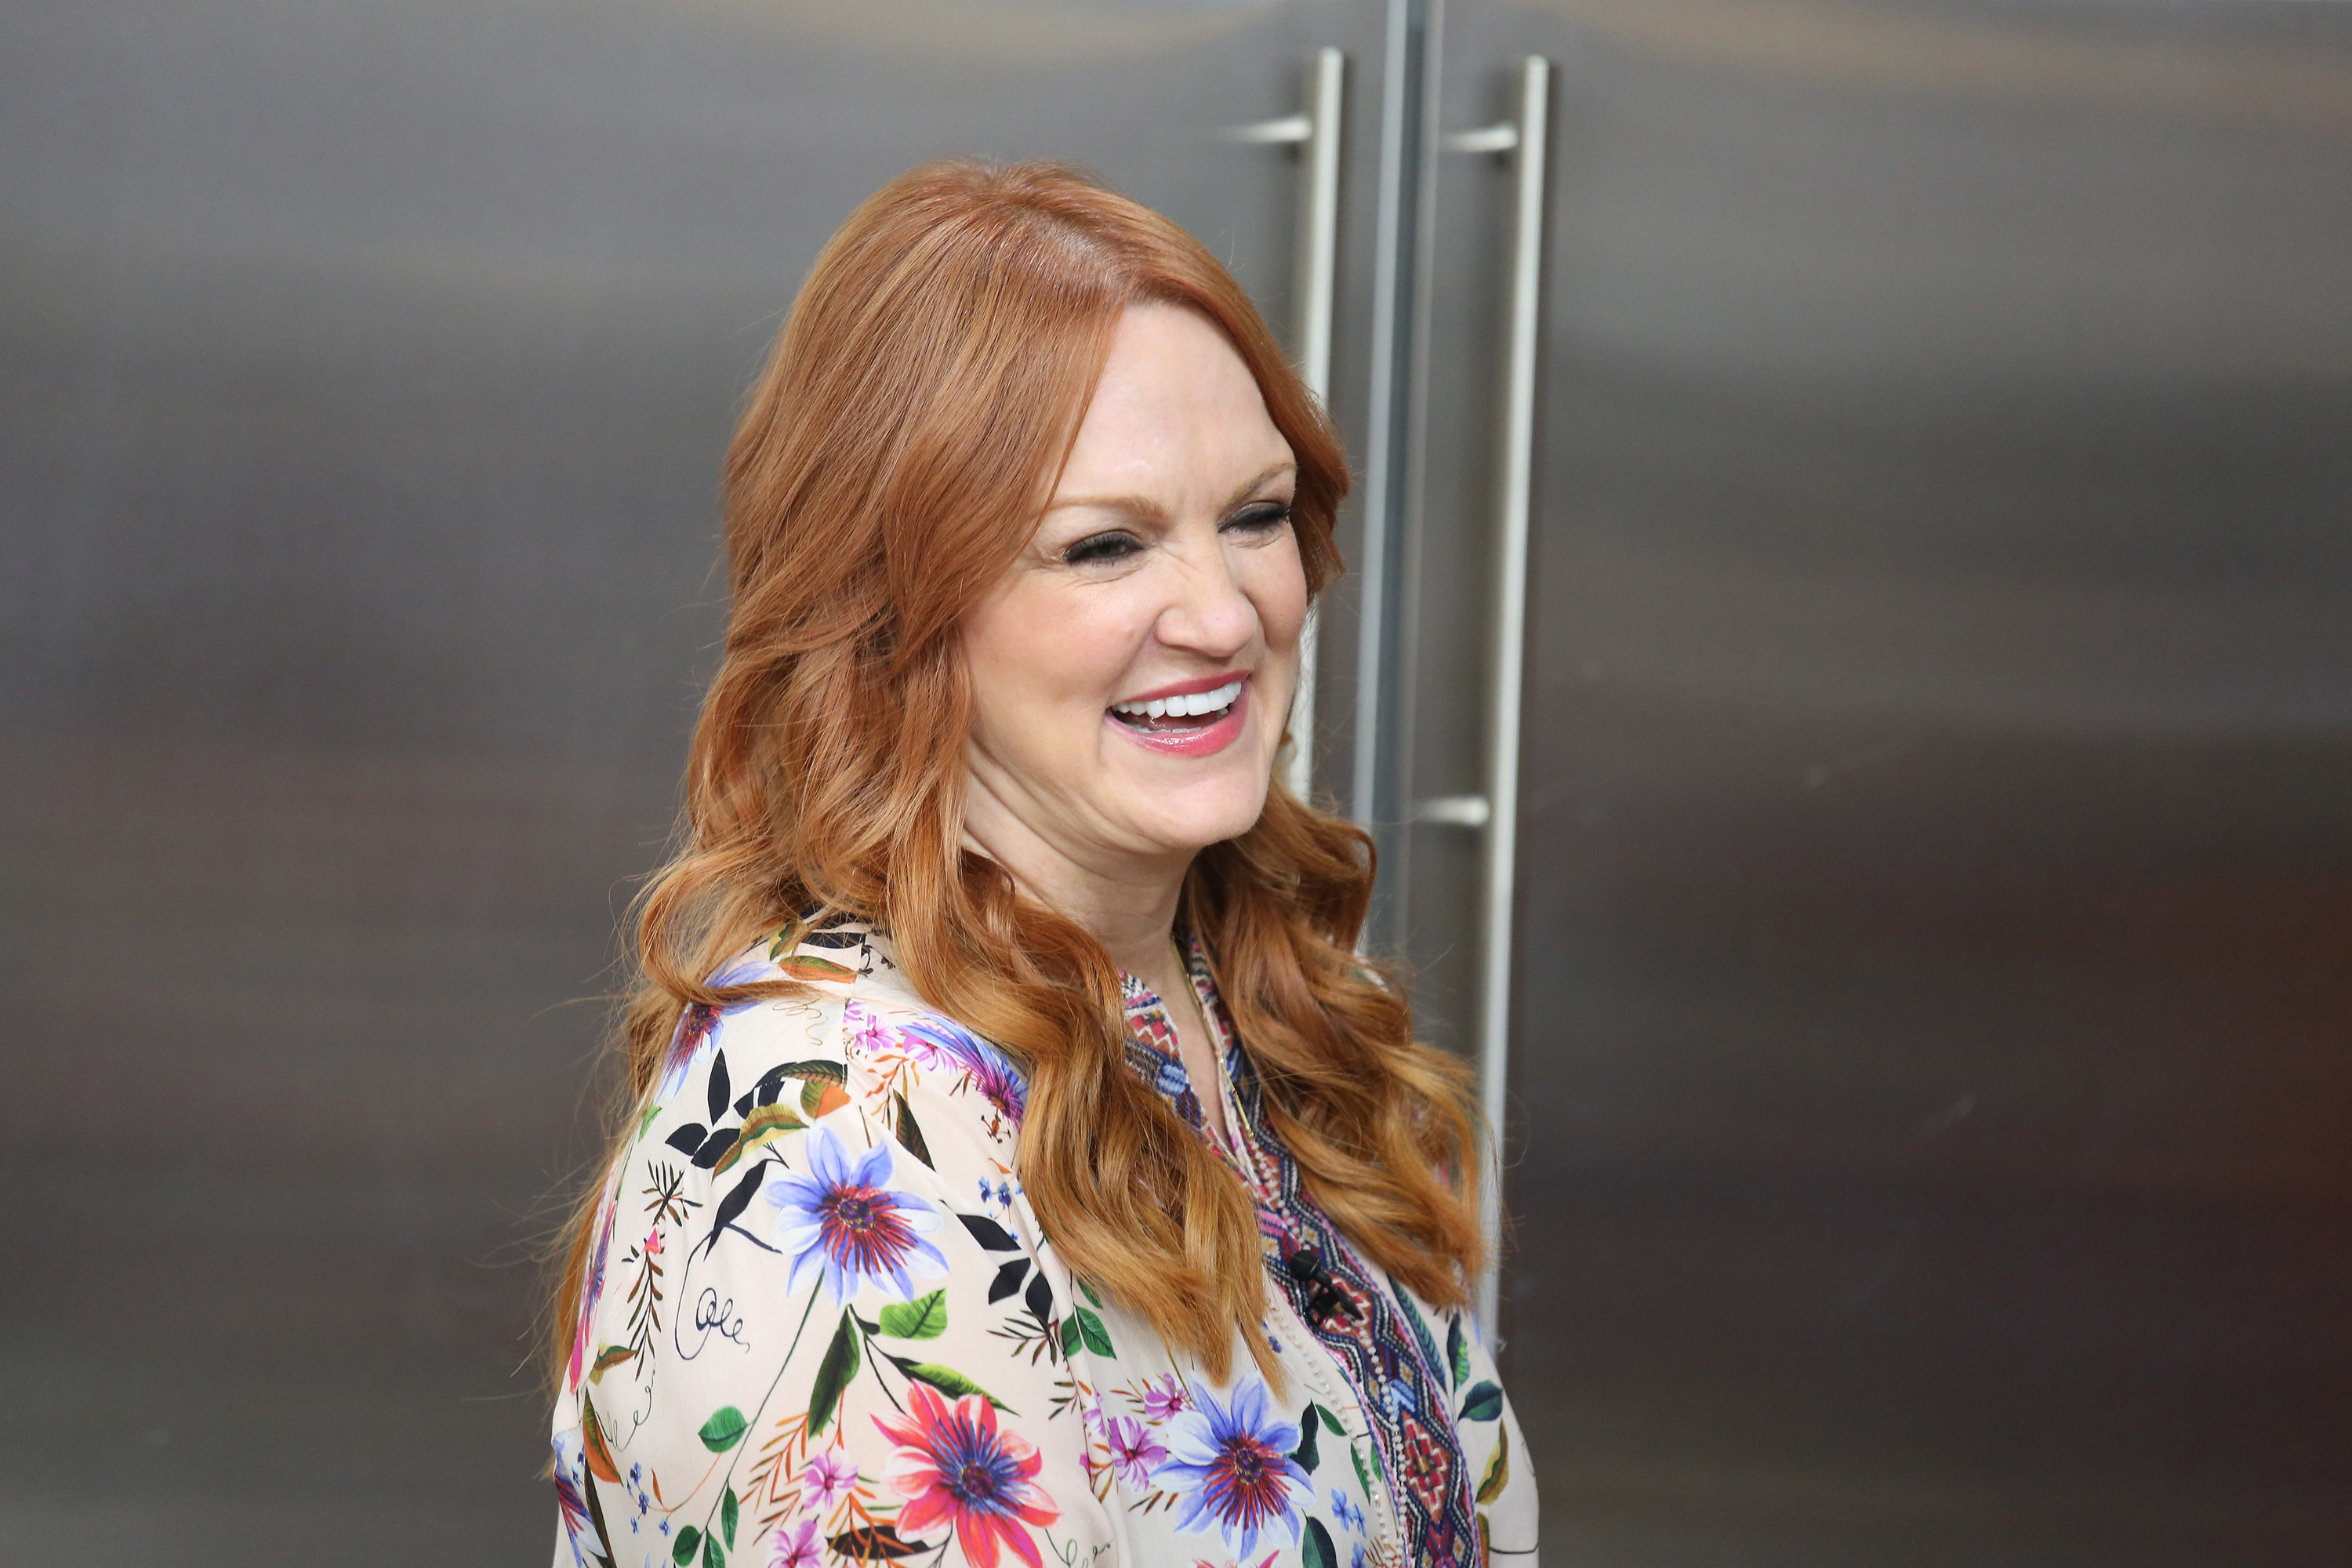 'The Pioneer Woman' star Ree Drummond wears a bright color shirt and smiles while standing in front of a stainless steel refrigerator